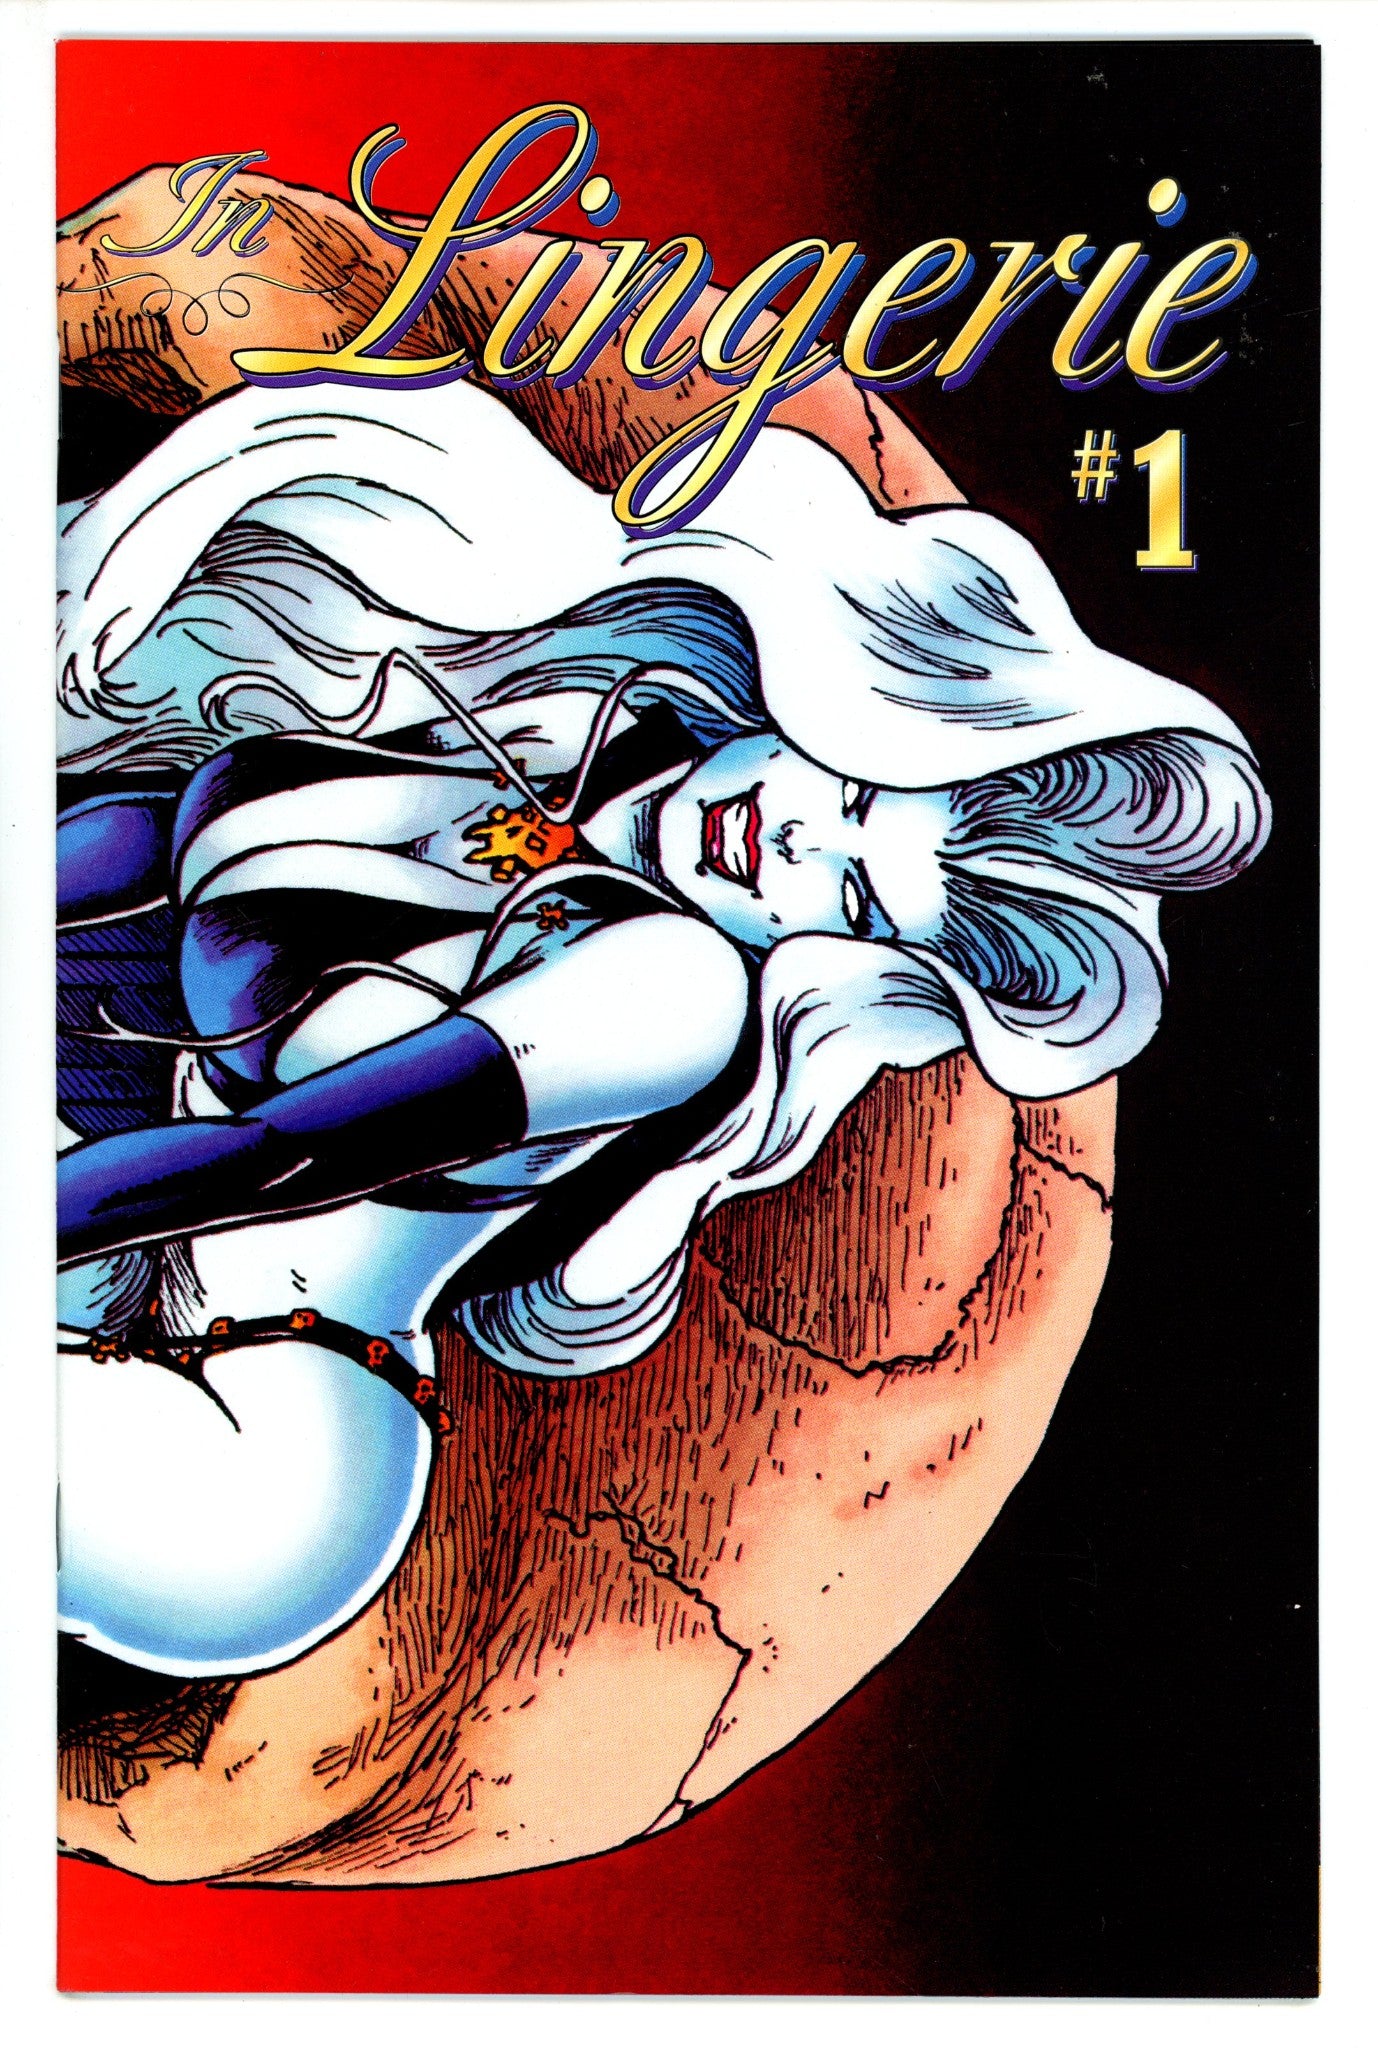 Lady Death: In Lingerie 1 (1995)